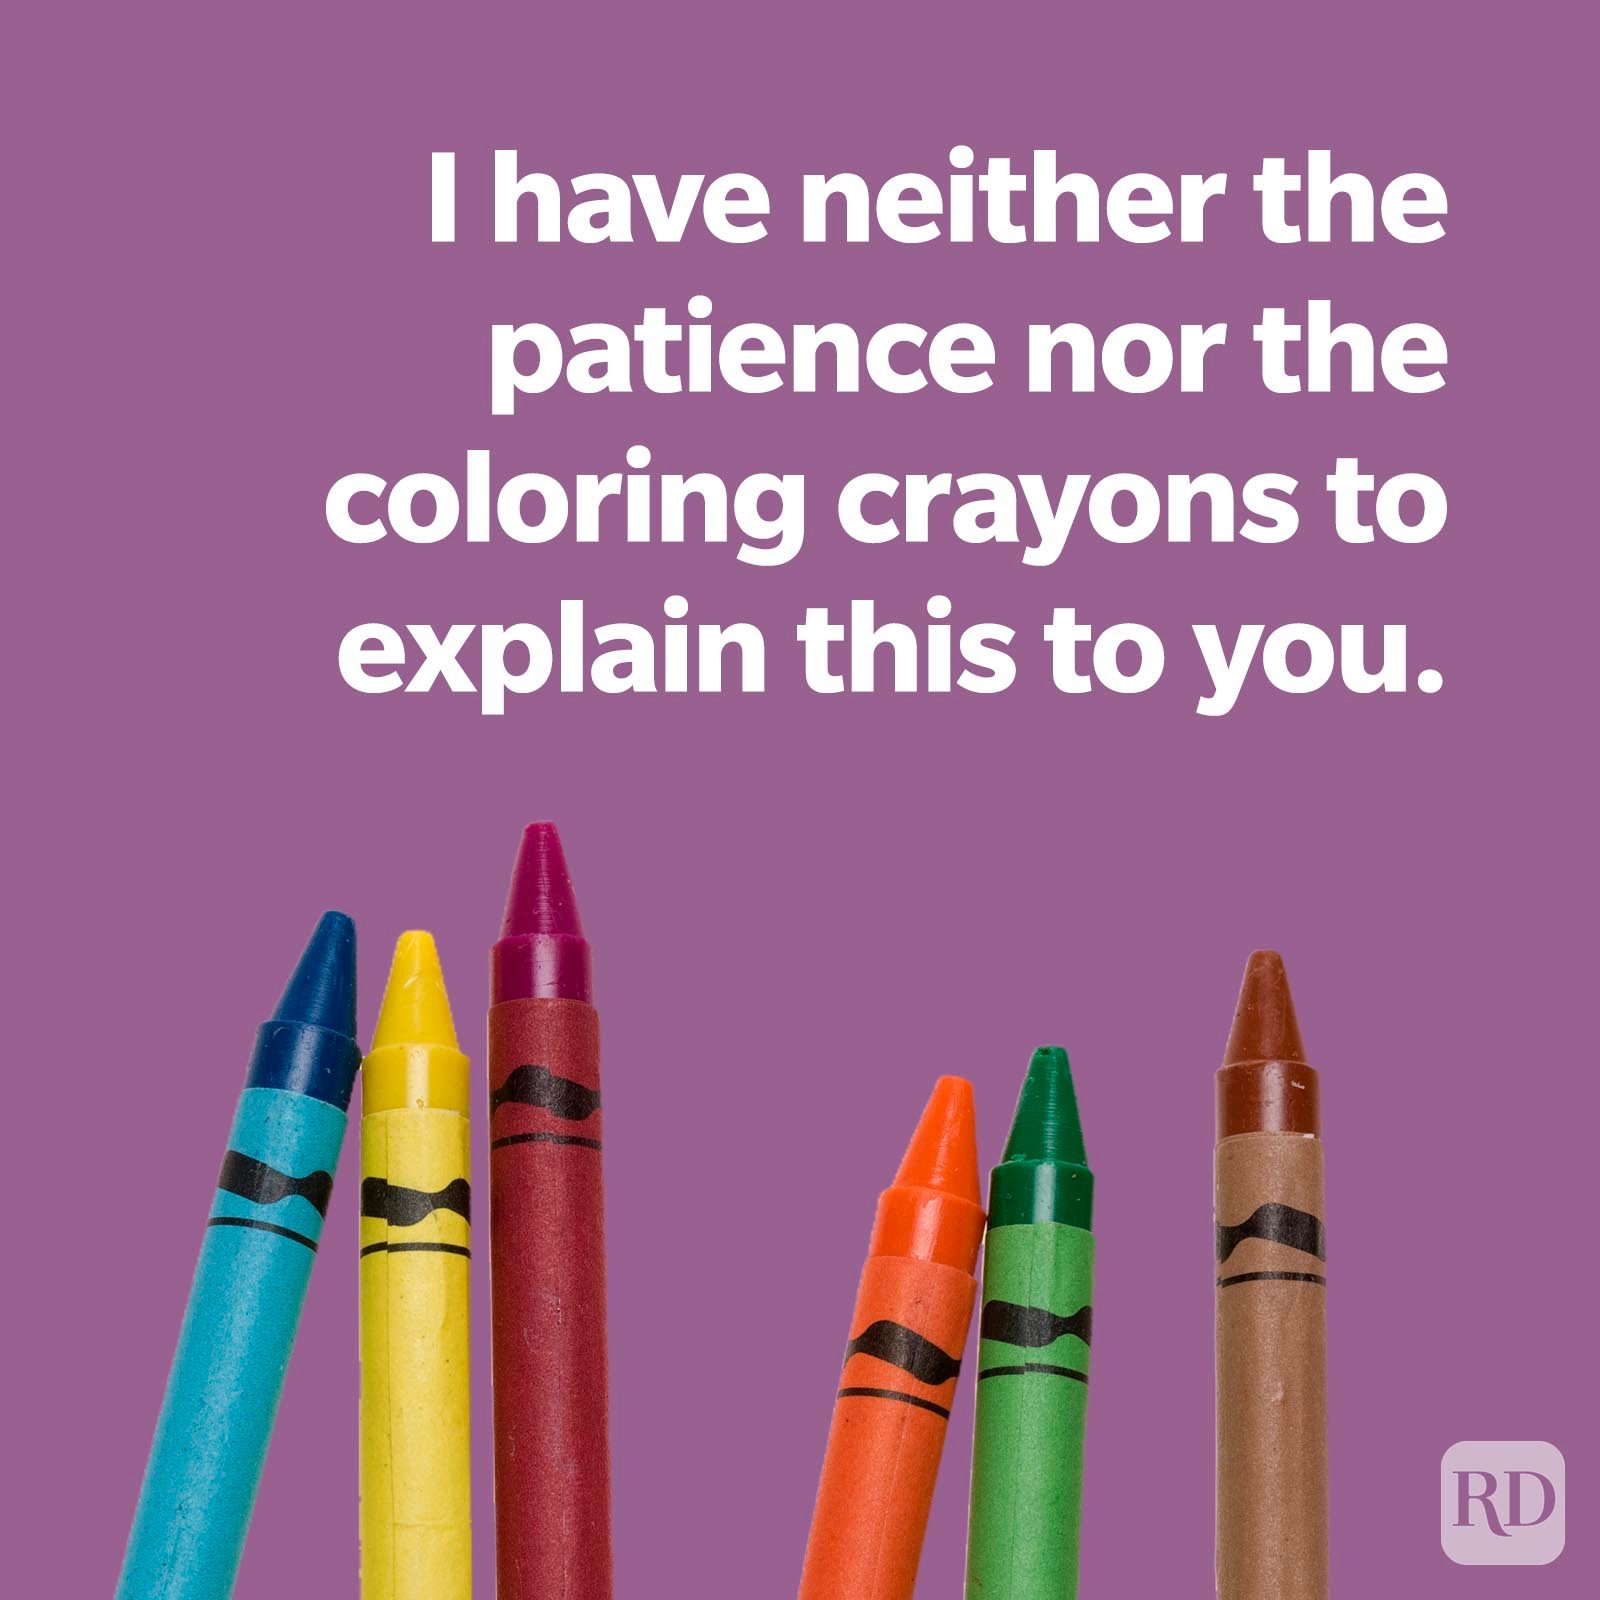 I have neither the patience nor the coloring crayons to explain this to you.